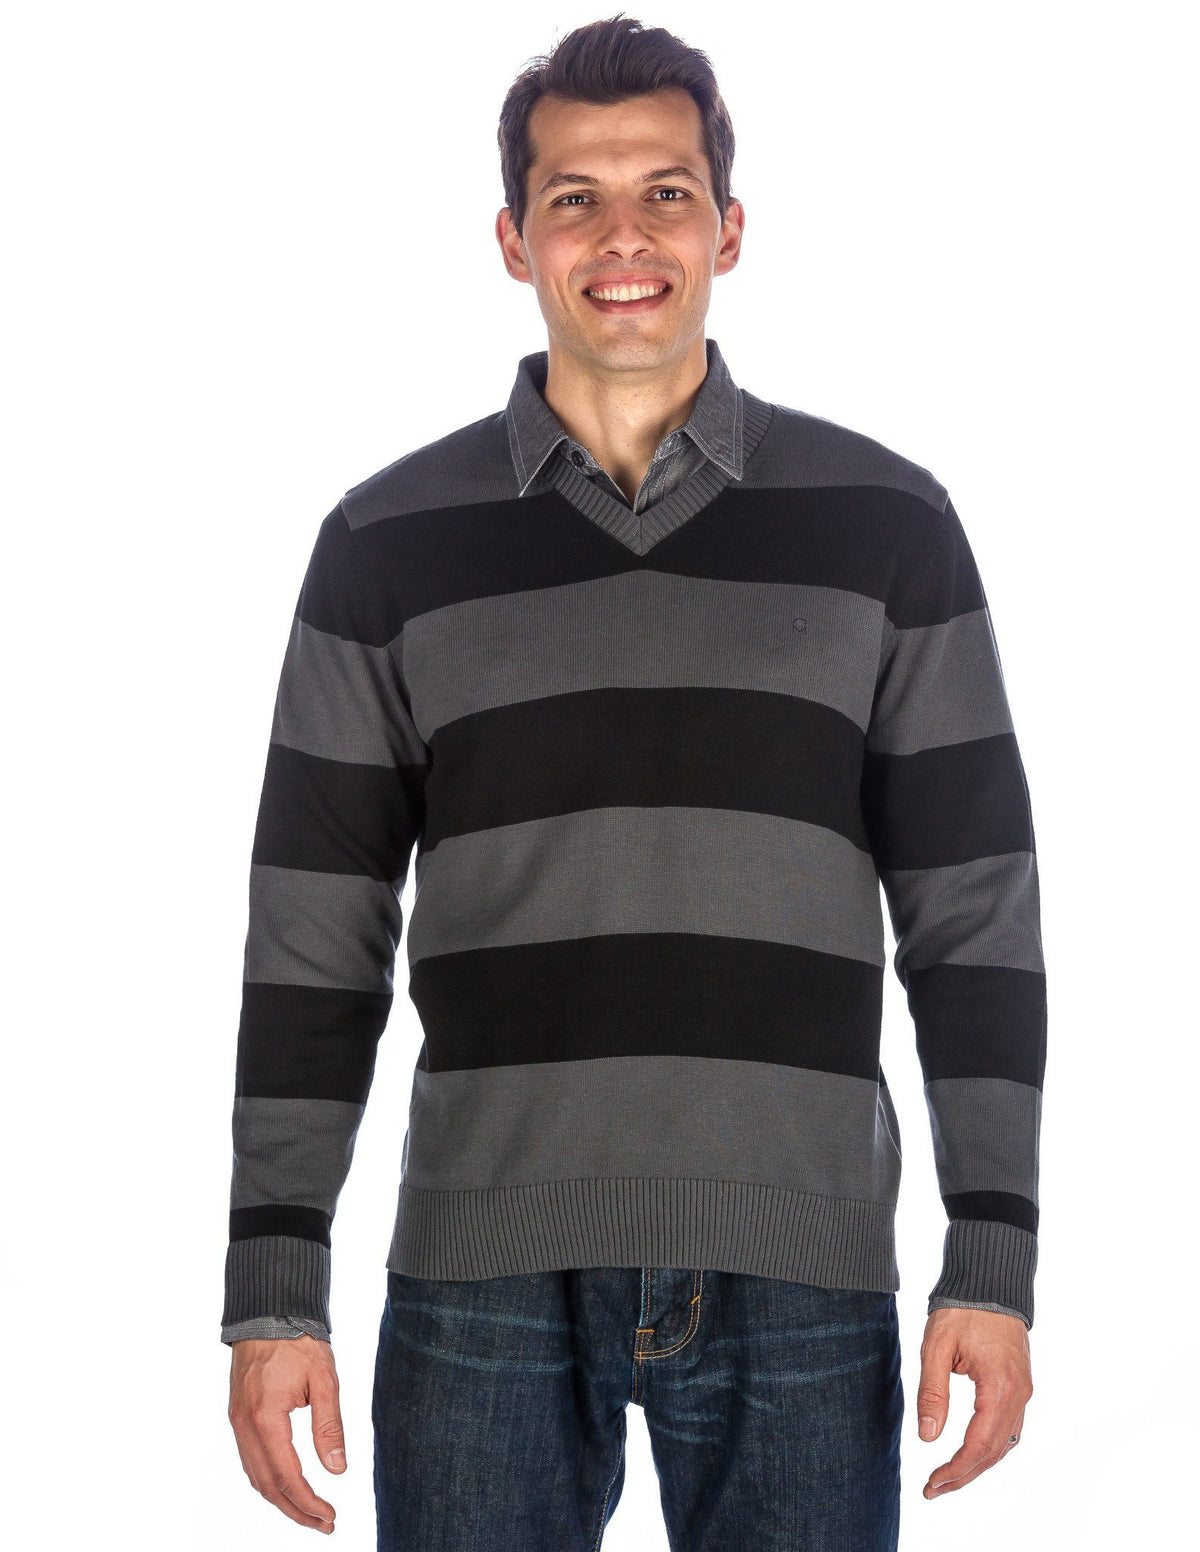 Men's 100% Cotton V-Neck Essential Sweater - Rugby Black/Gray